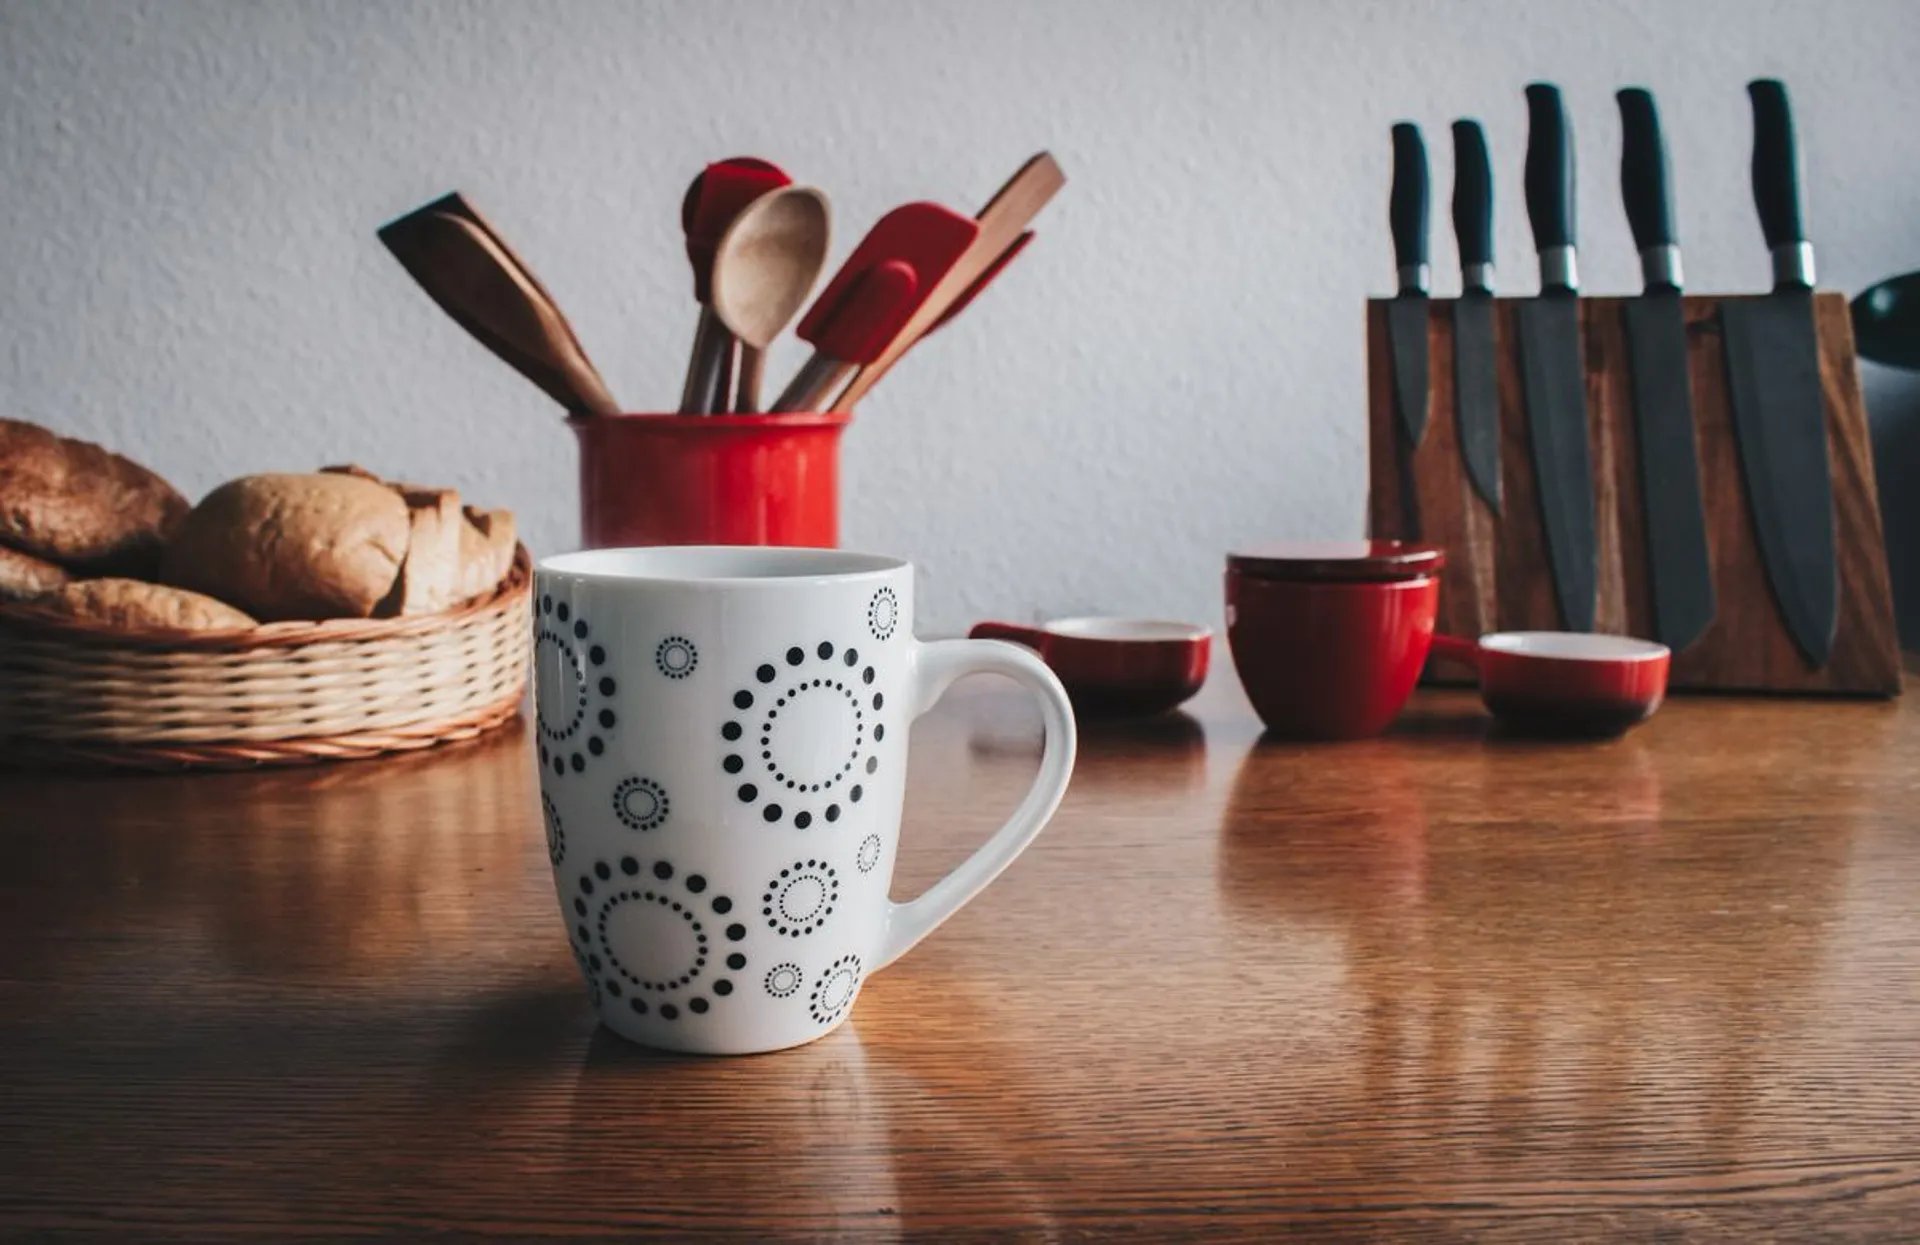 5 must-have kitchenware products to save time while cooking